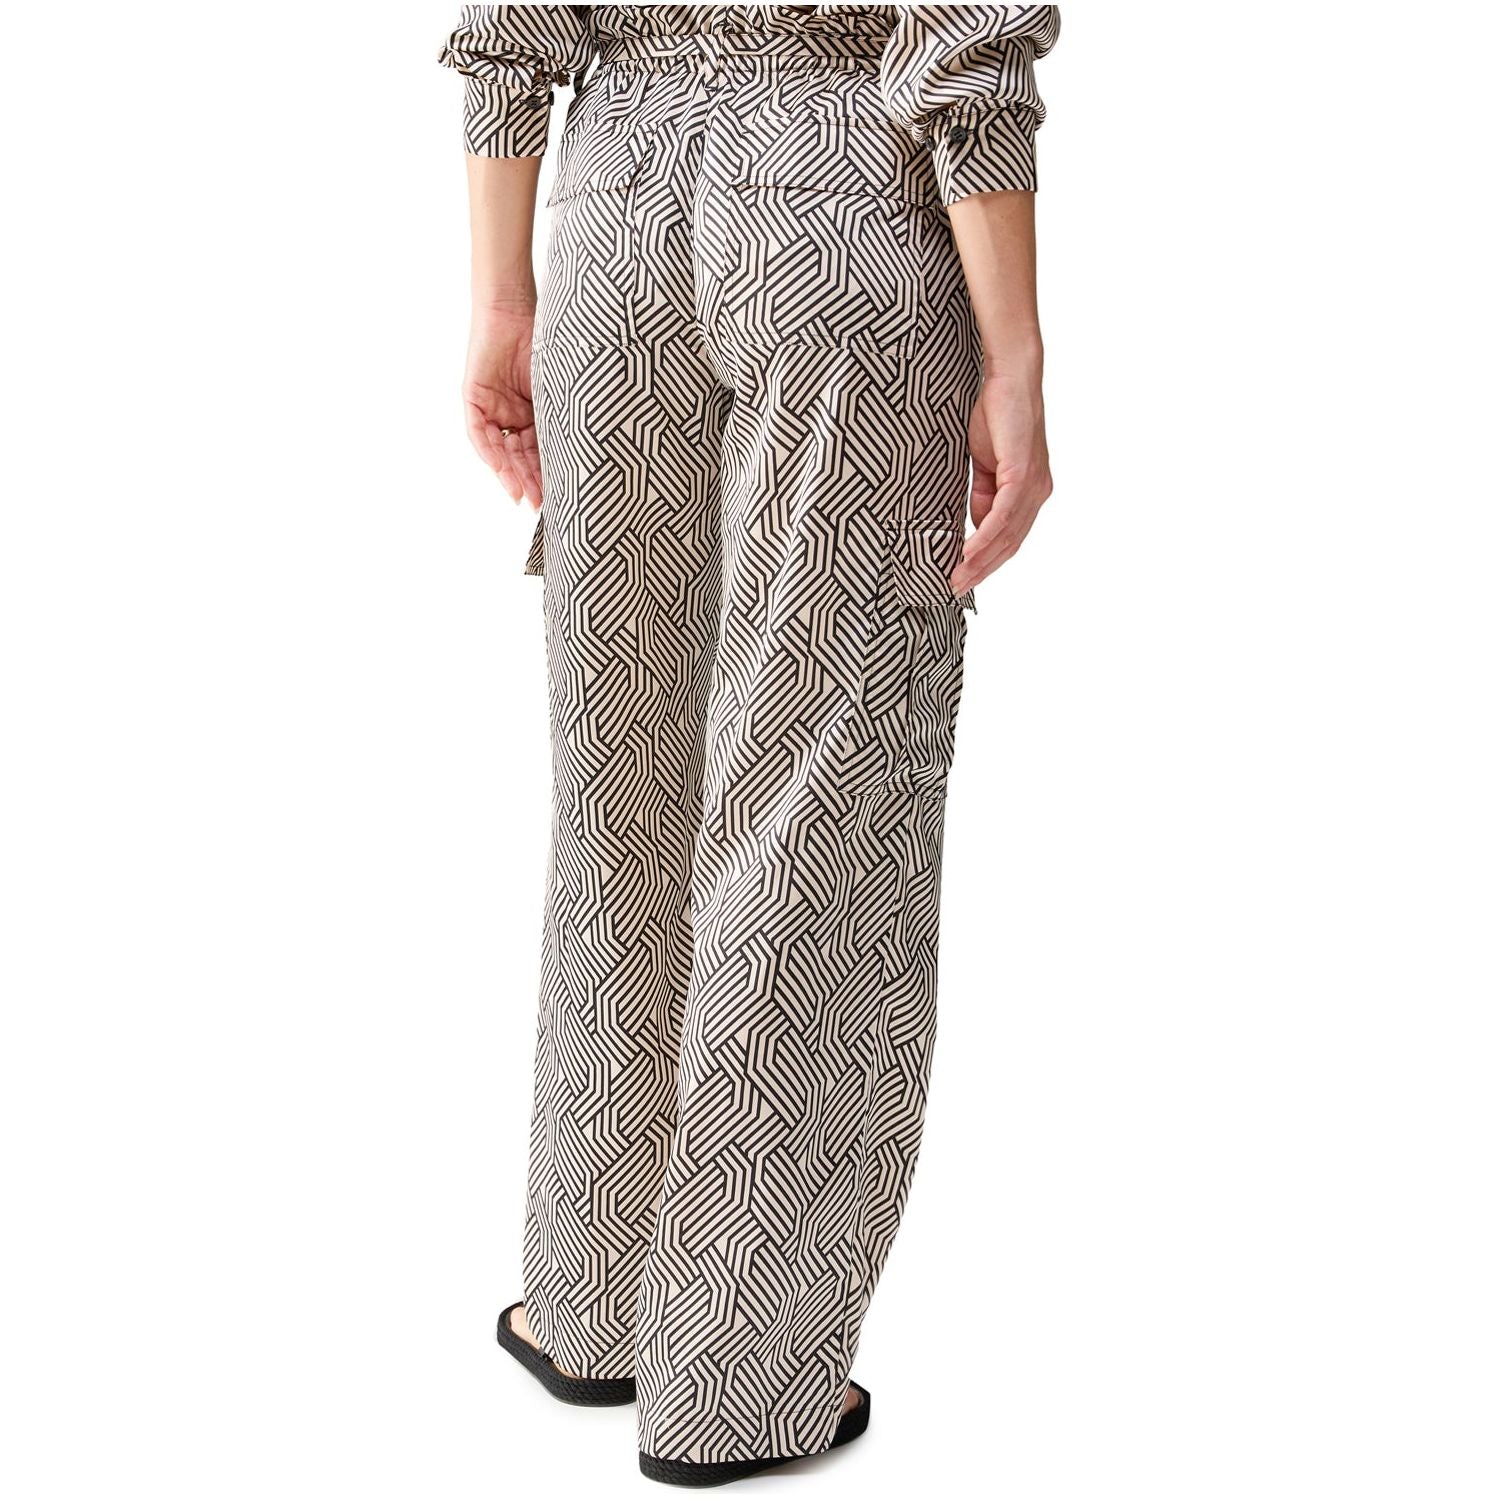 Sanctuary - All Tied Up Cargo Pant in Maze